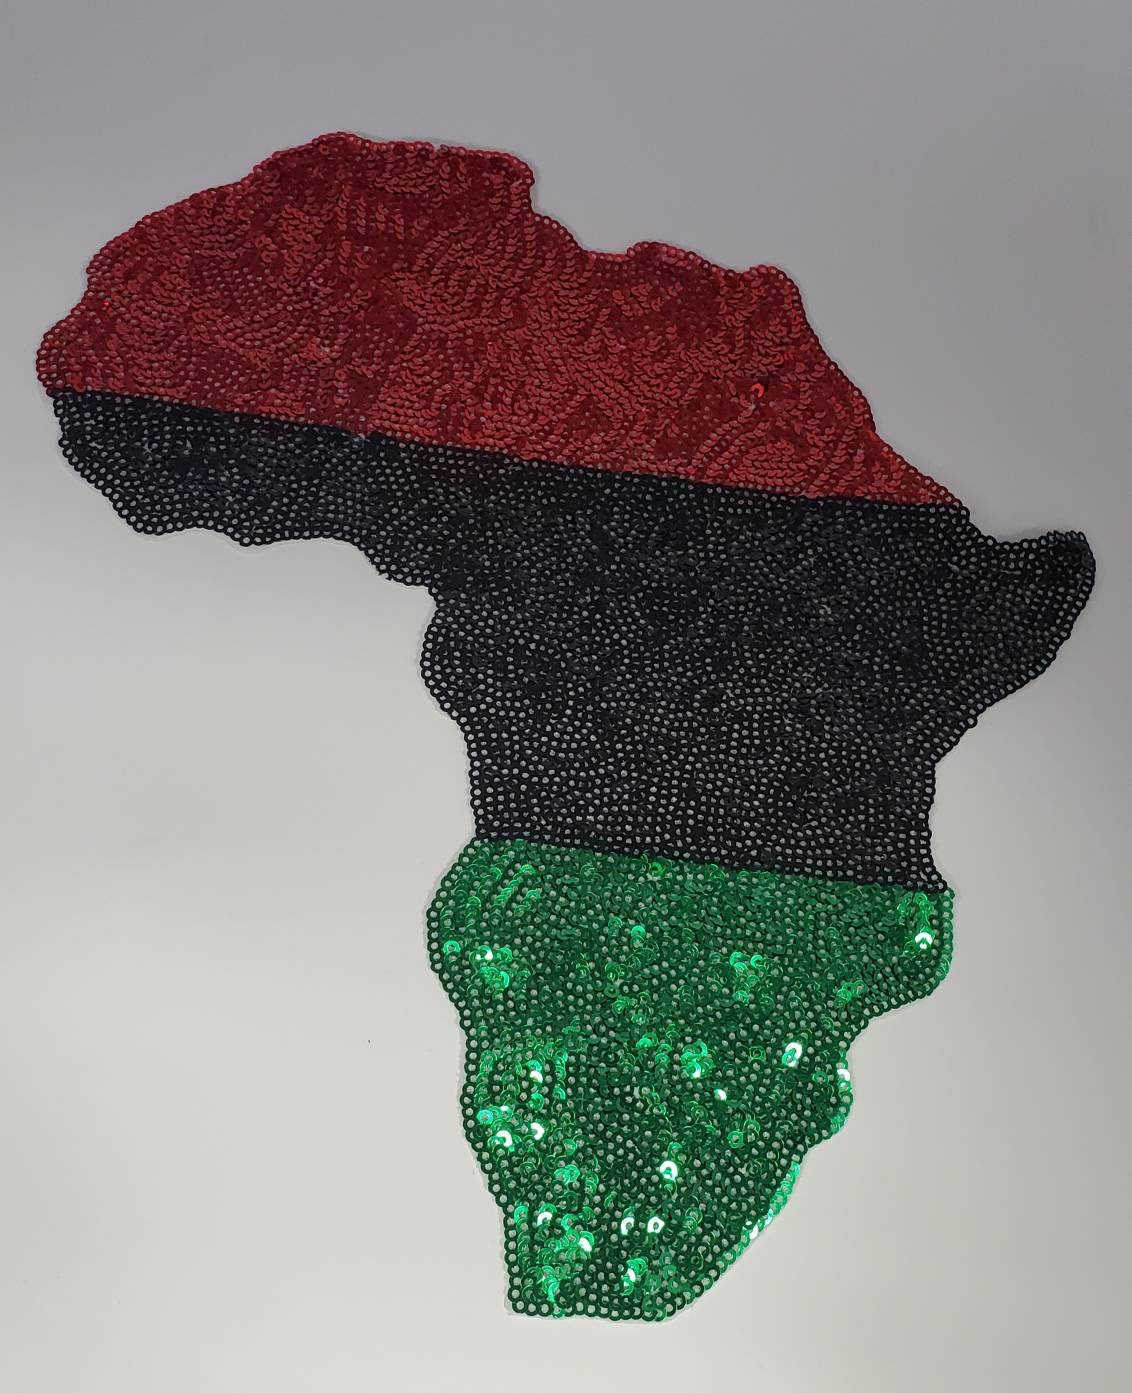 SEQUINS, "Pan-African Flag" Iron-On RGB Afrocentric Patch; Juneteenth, Marcus Garvey Unia Flag, Red, Green, & Black, 10," Jacket Patch